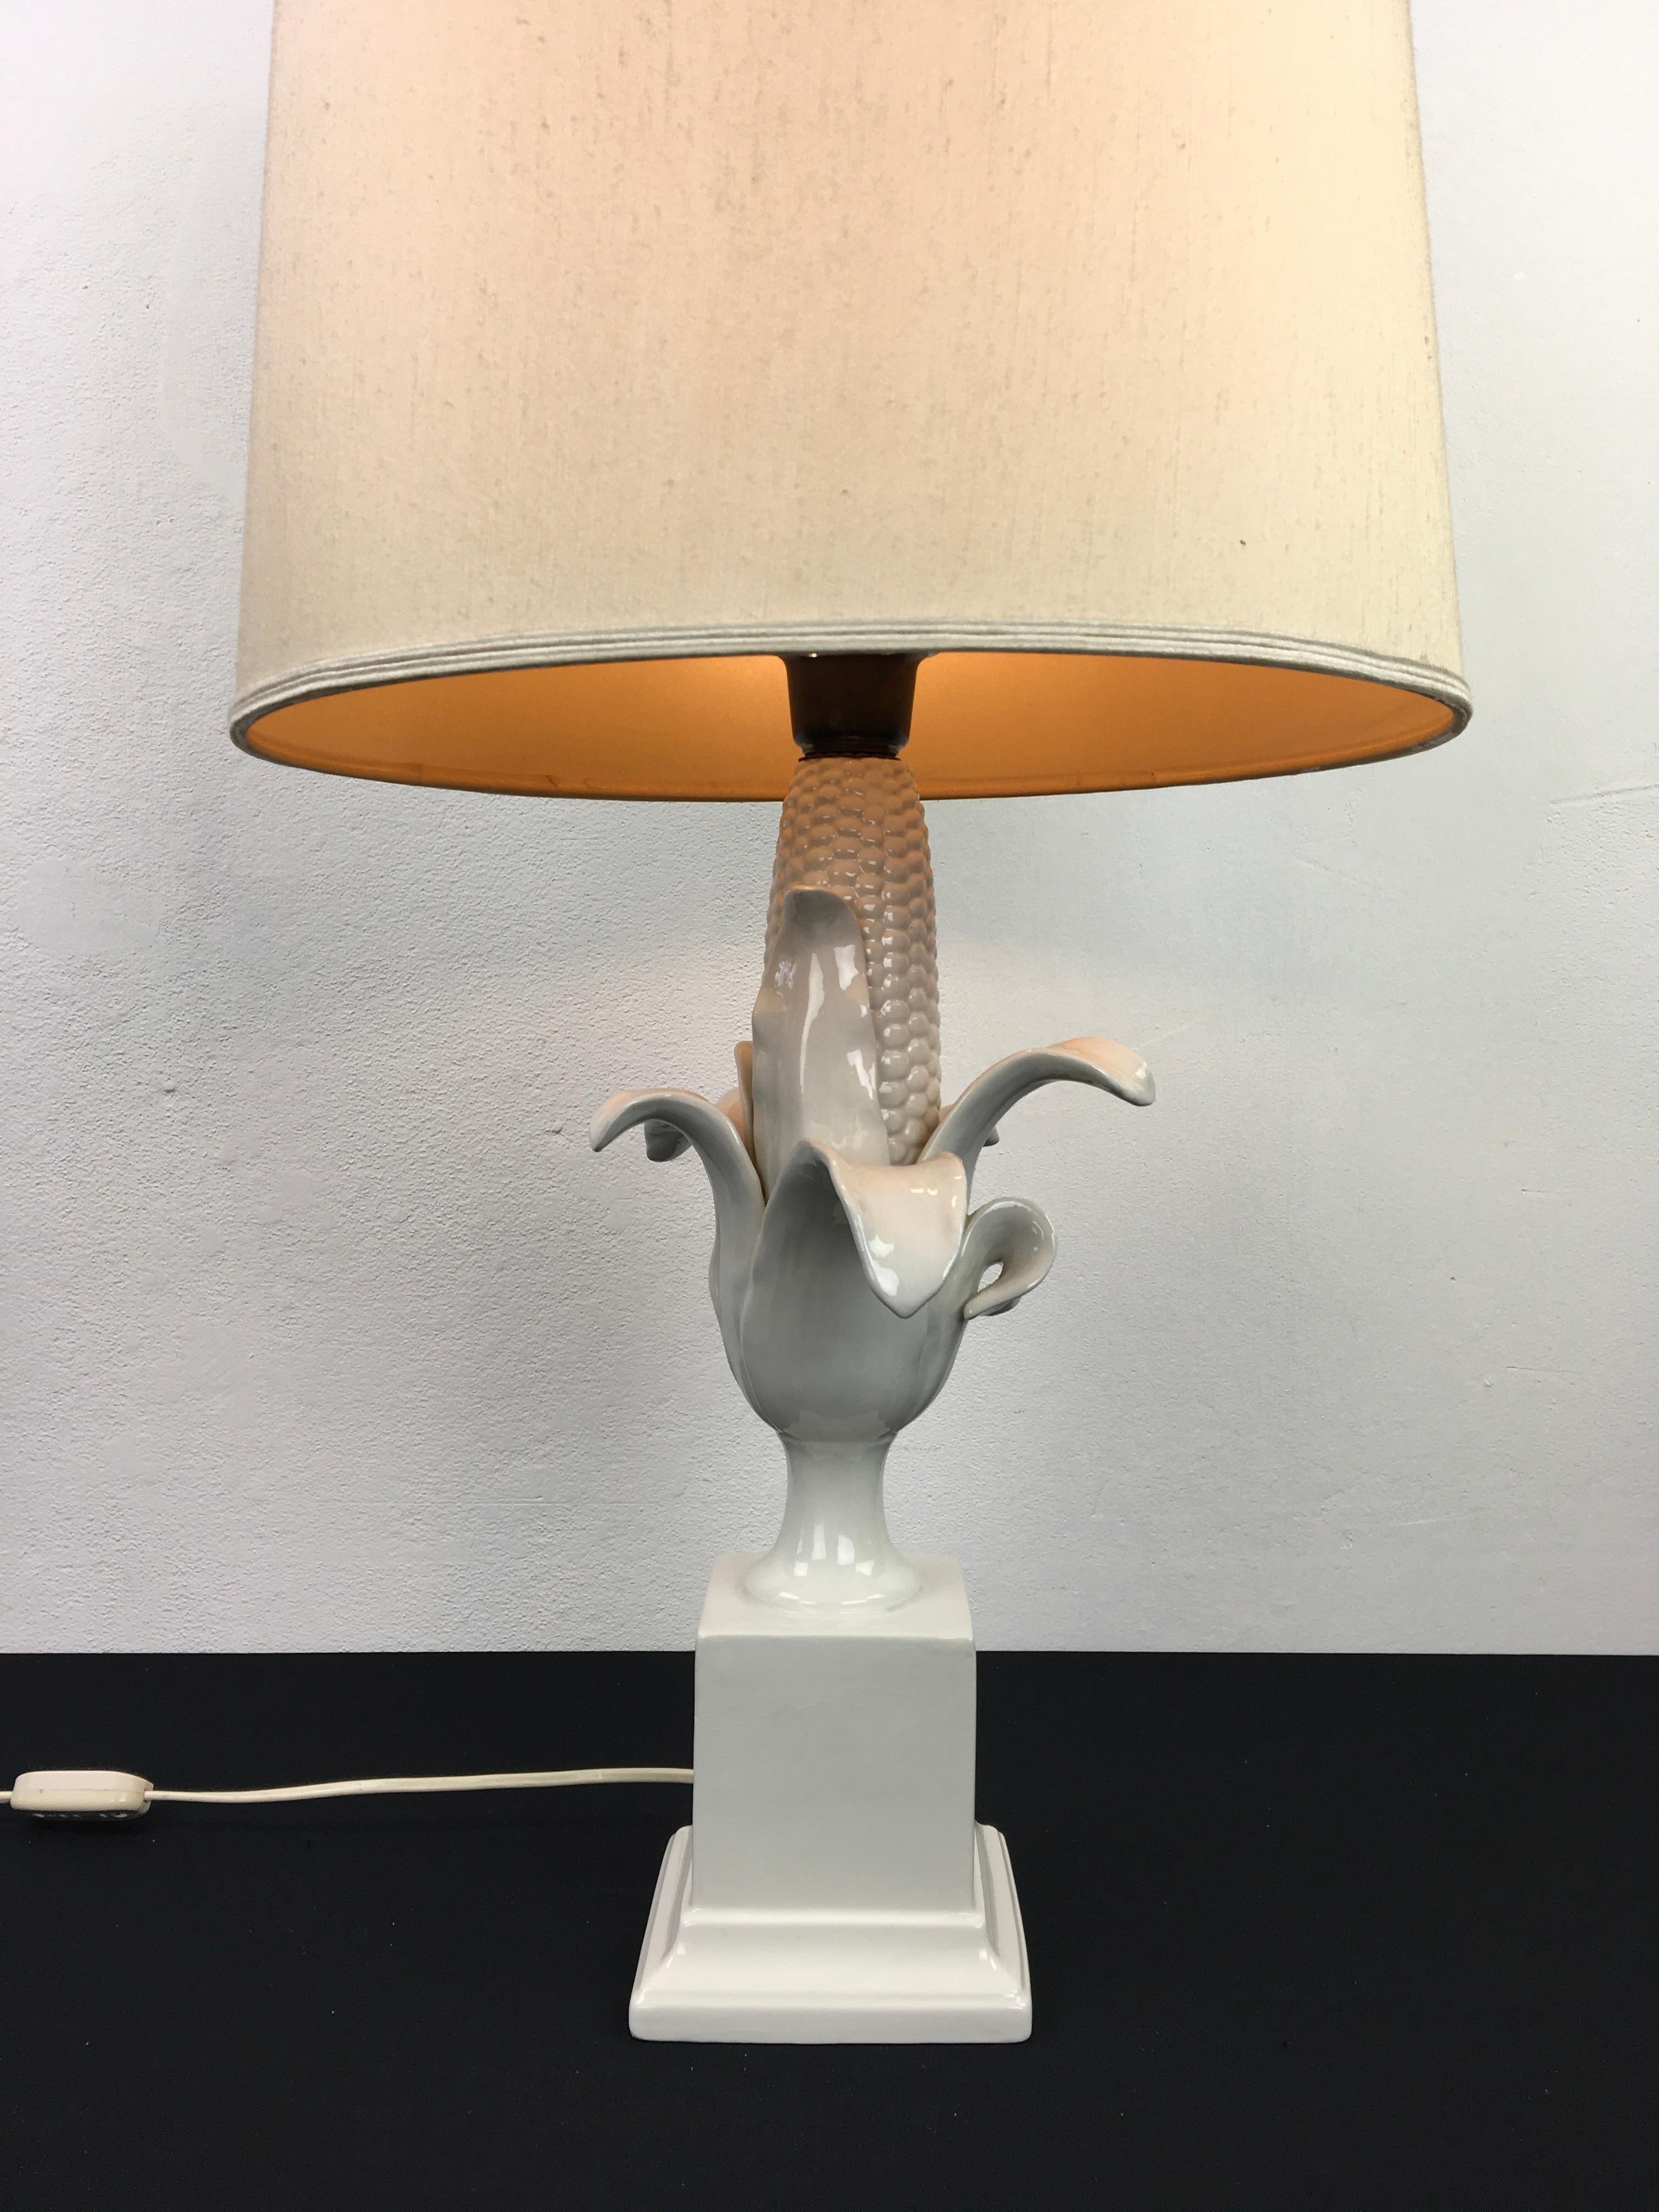 Corn cob table lamp made in Italy. 
This 1960s white table lamp with a corn cob is made of porcelain and comes with the original fabric shade. 
A stylish white table lamp in your interior. 
Corn table lamp or maize lamp of the 1960s. 

The